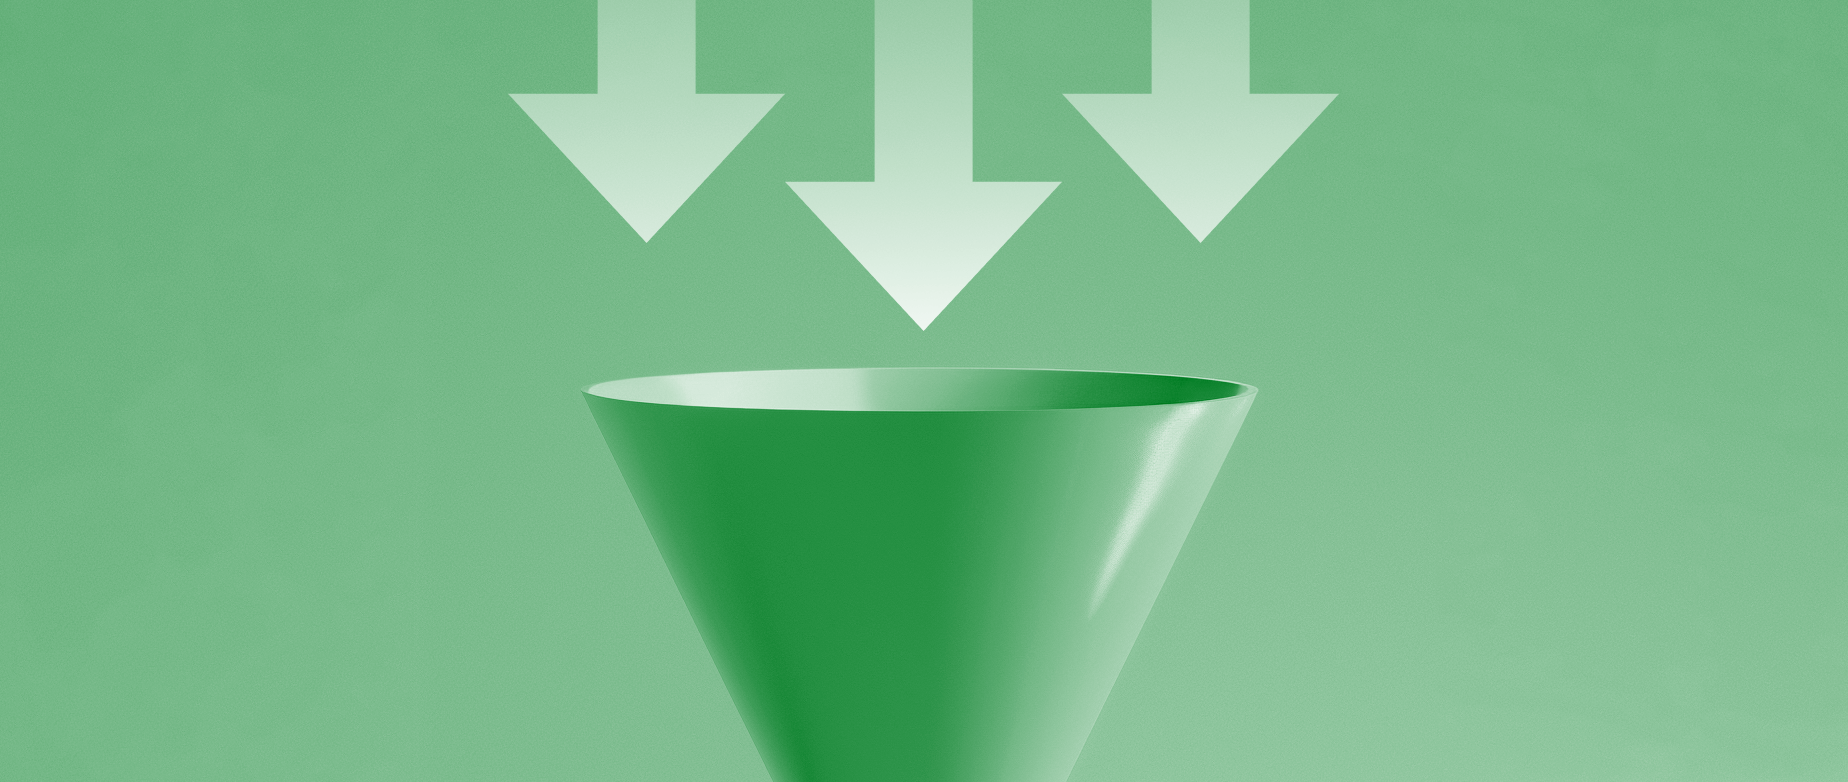 A green funnel with three arrows pointing down above it on a green background.